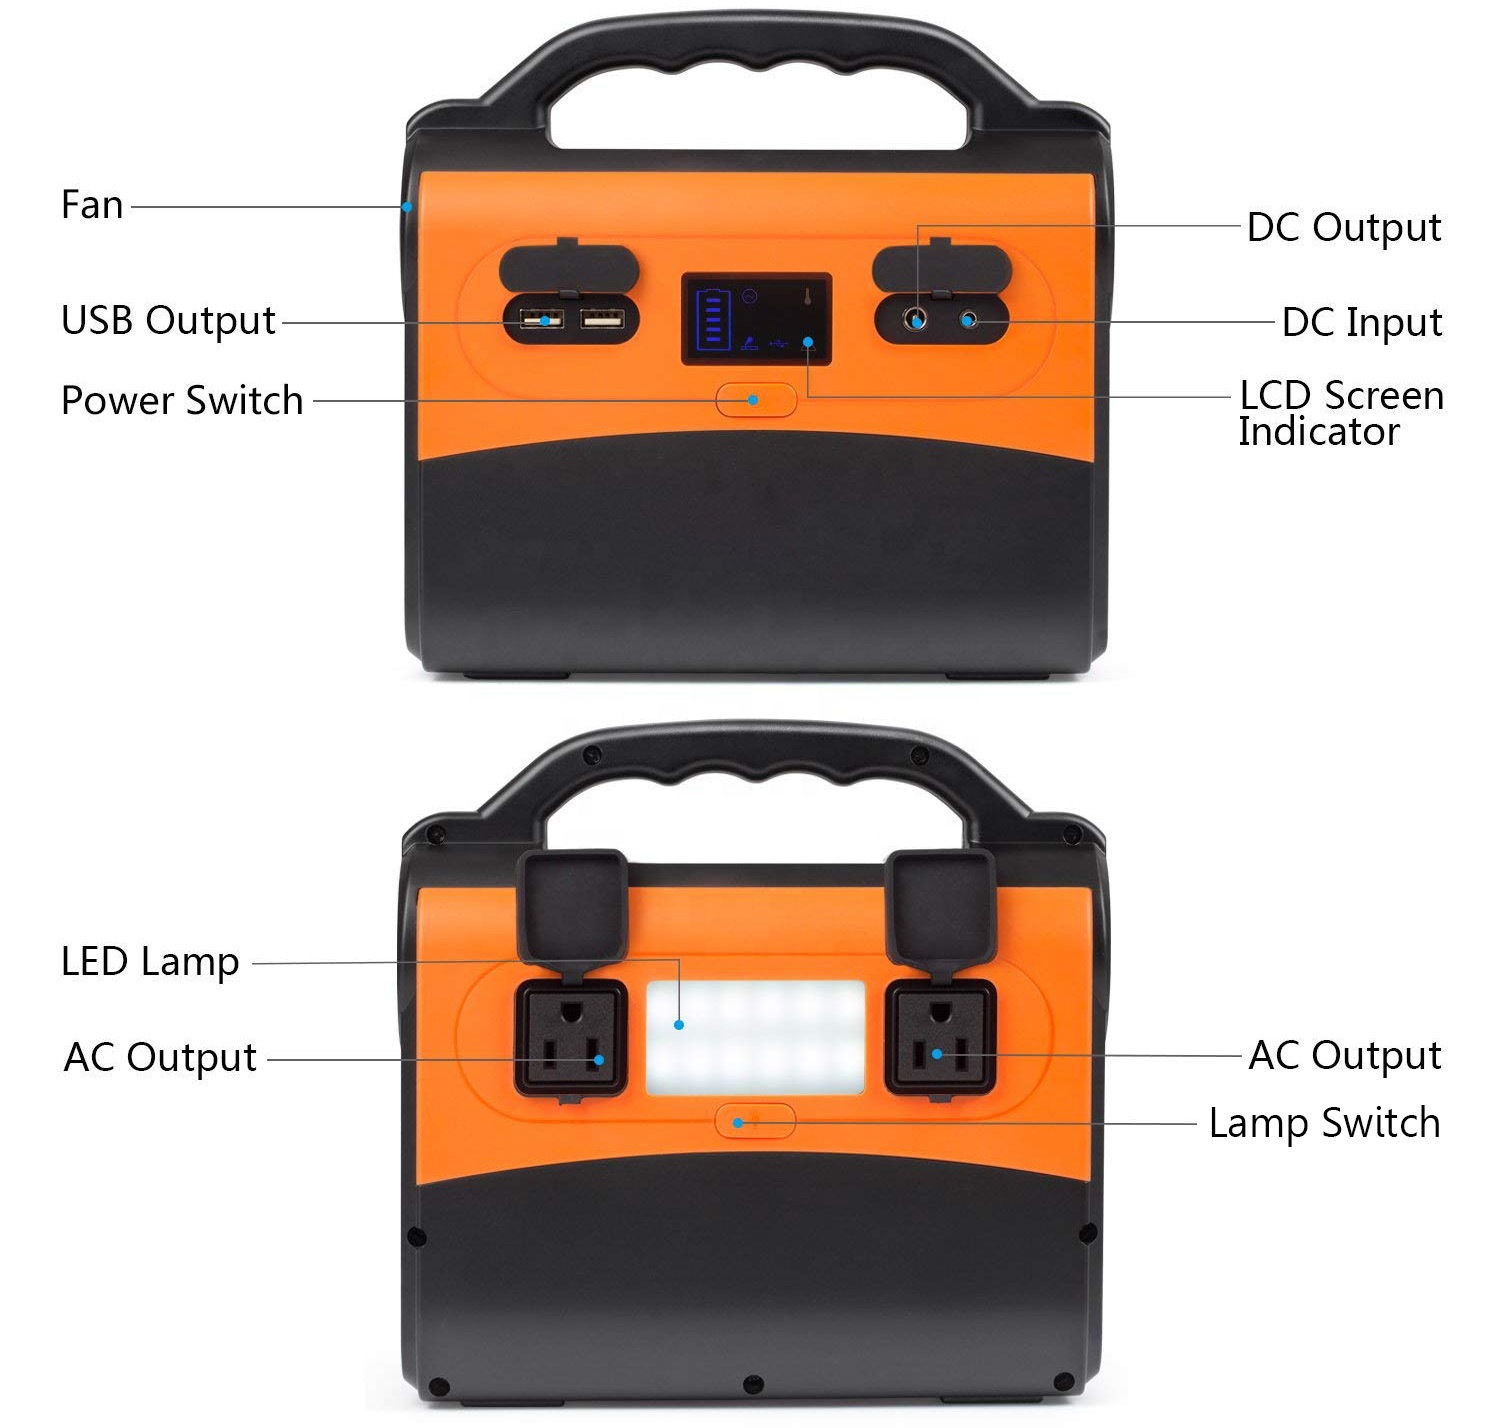 The difference between lithium battery portable UPS and mobile power supply